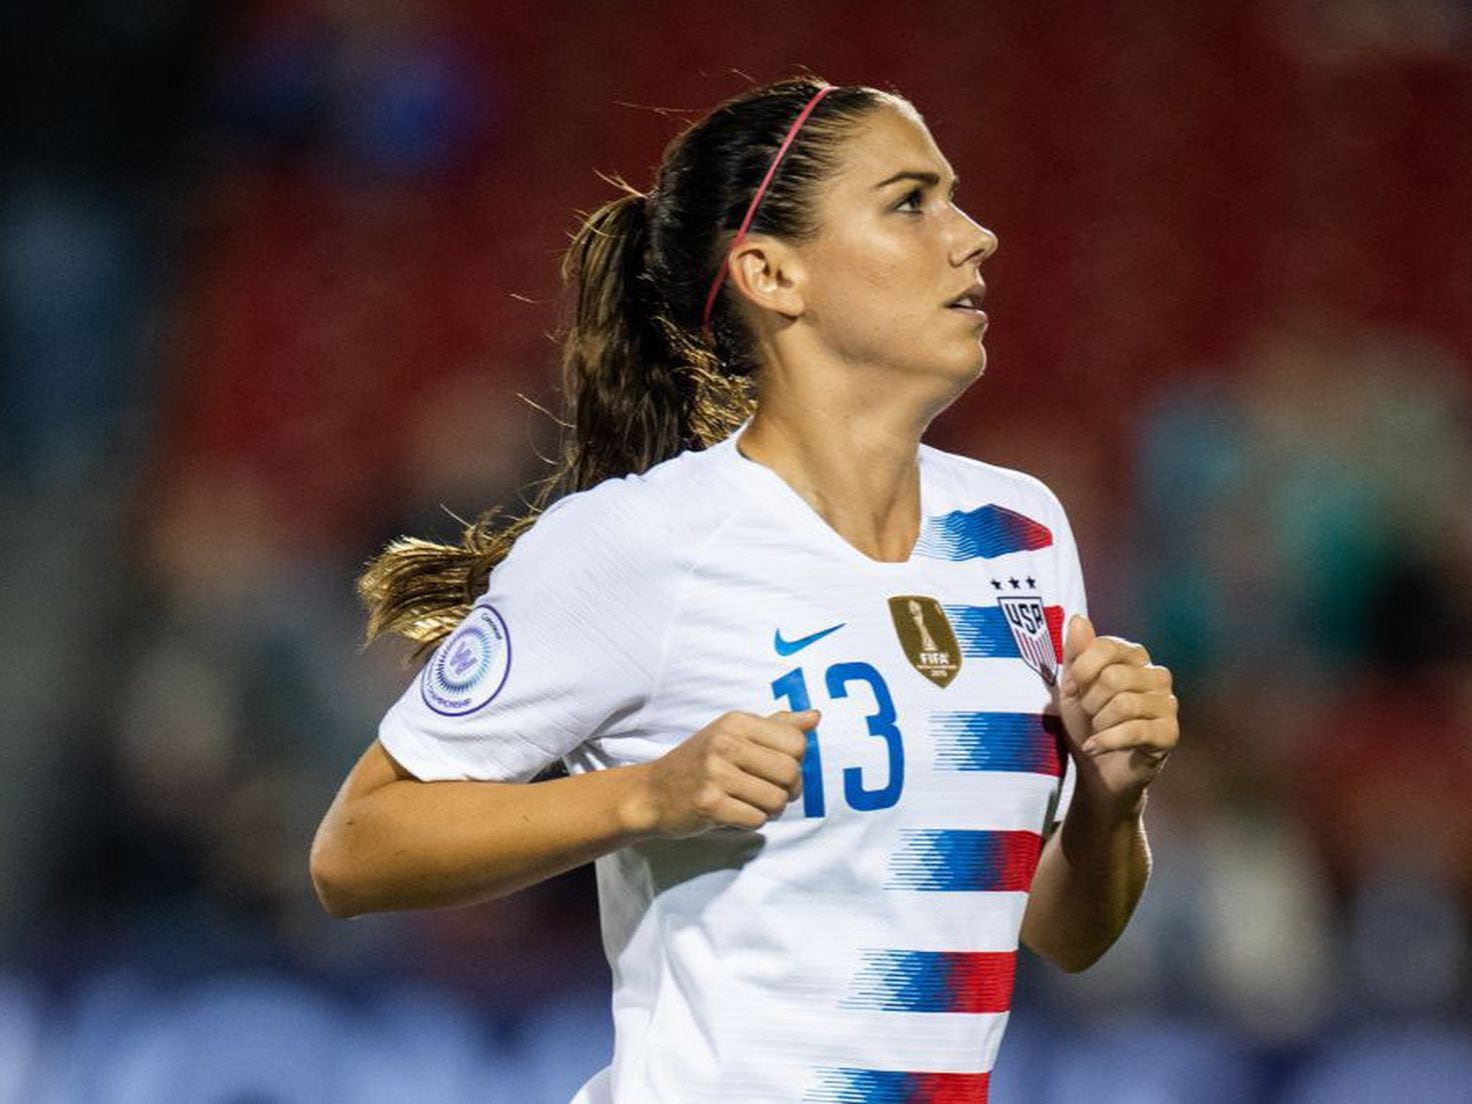 U.S. women's soccer players seek more than $66 million in damages